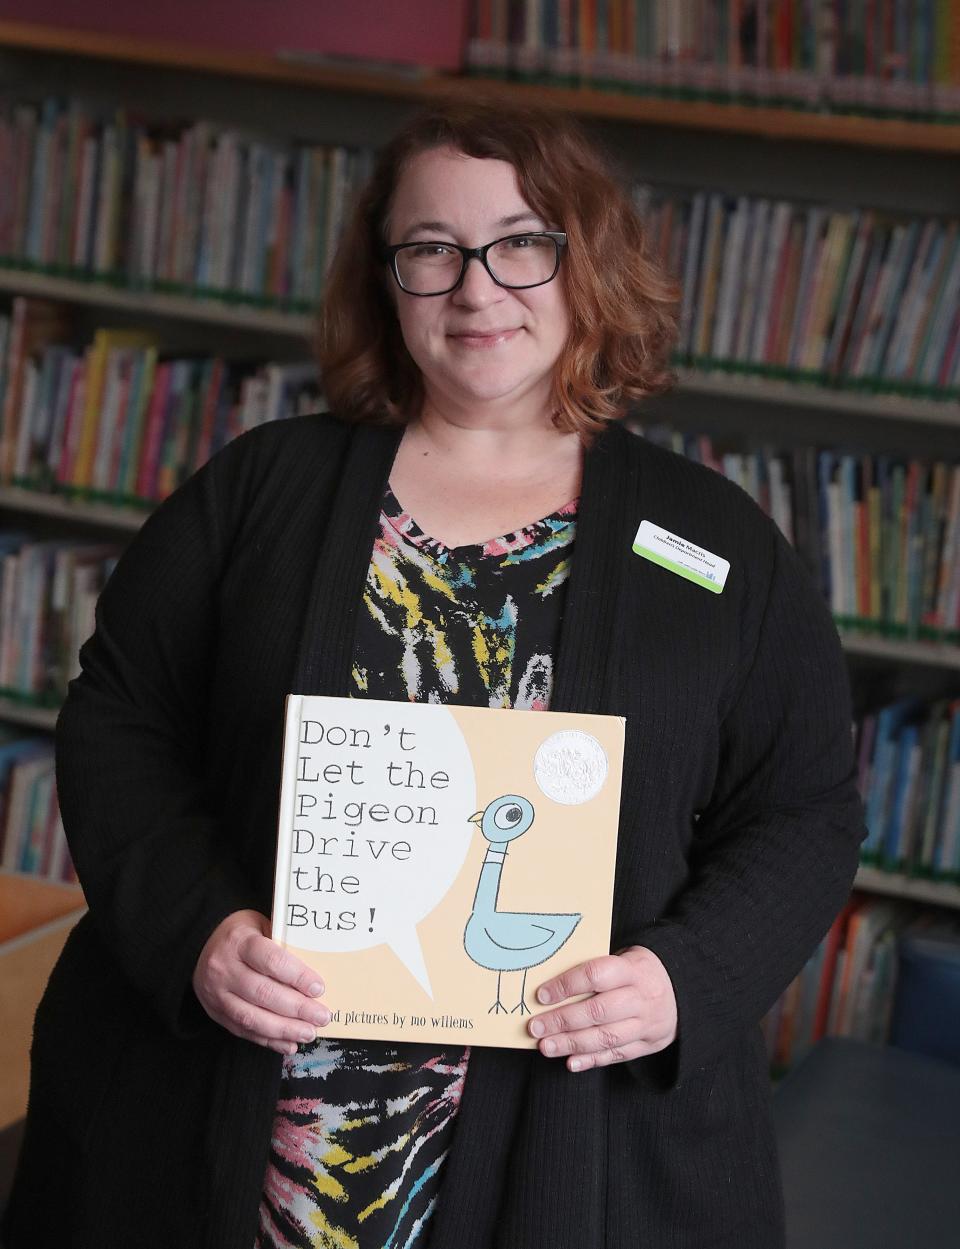 Jamie Macris has lived and worked in North Canton for more than 21 years. She heads the Children's Department at the North Canton Public Library.